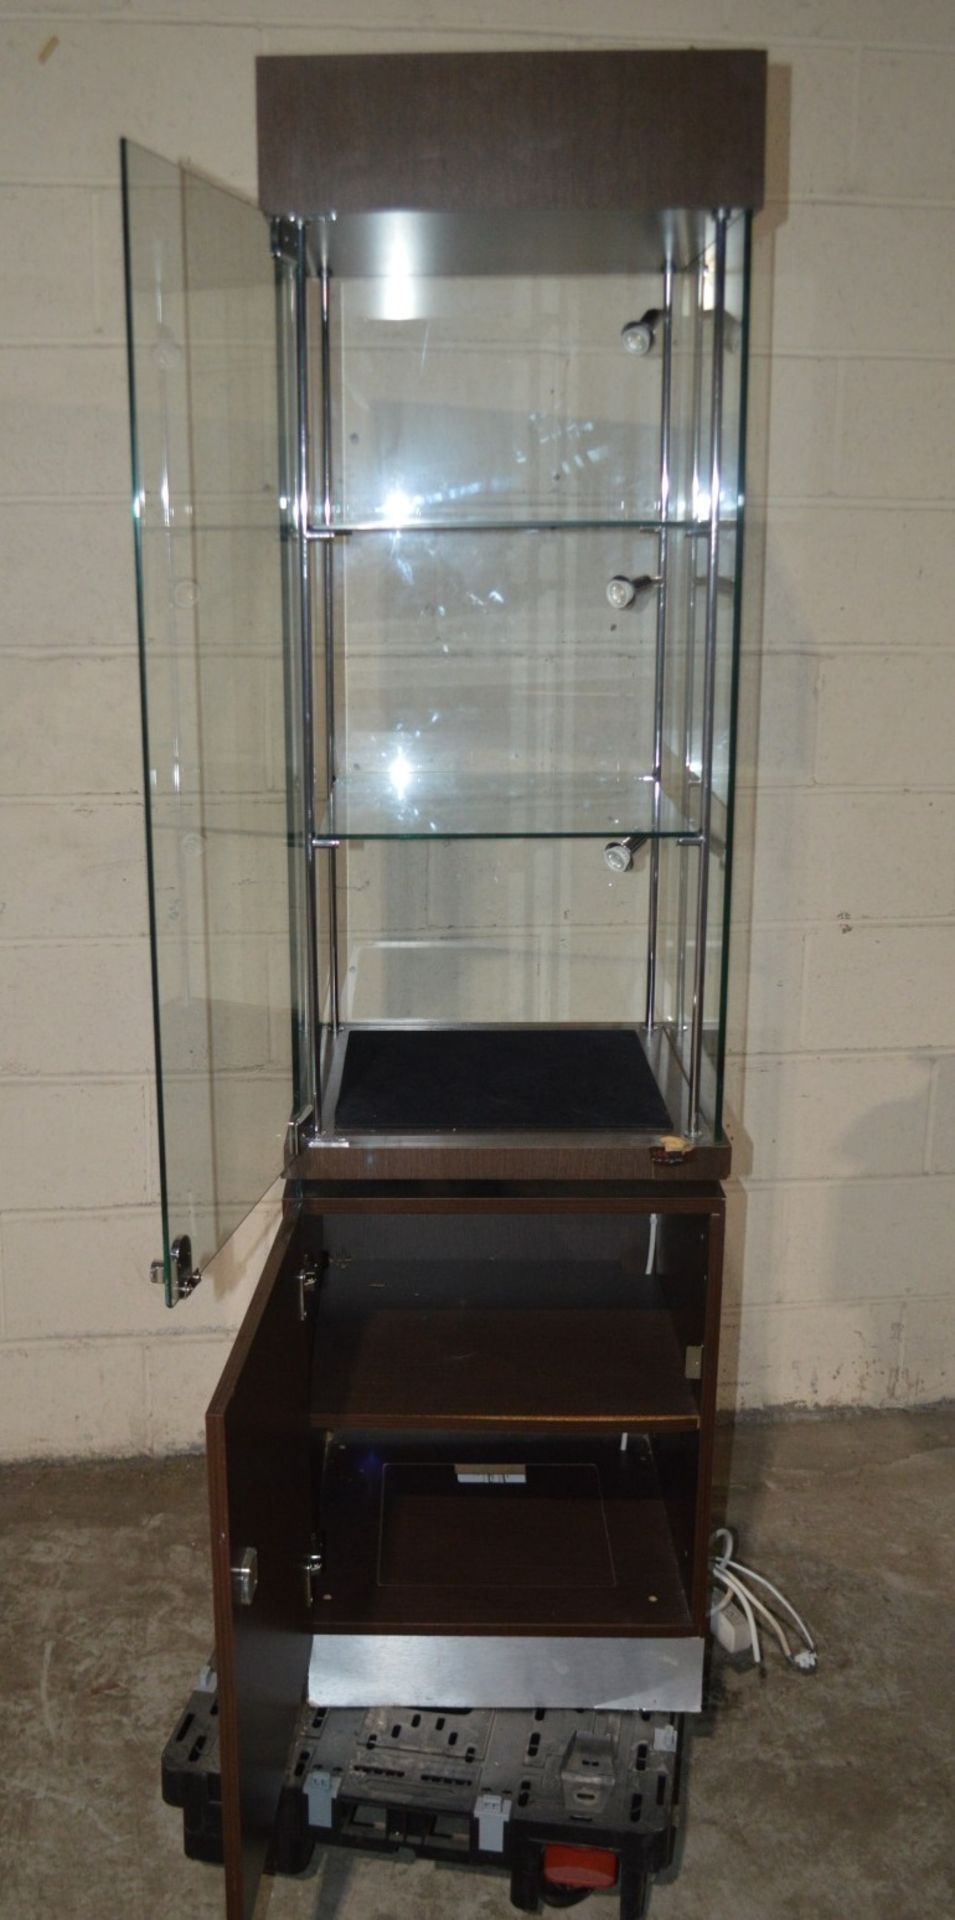 1 x Lockable Illuminated Display Case - Dimensions: H186 x W50 x D50cm - Unlocked, Without Key - Image 5 of 6